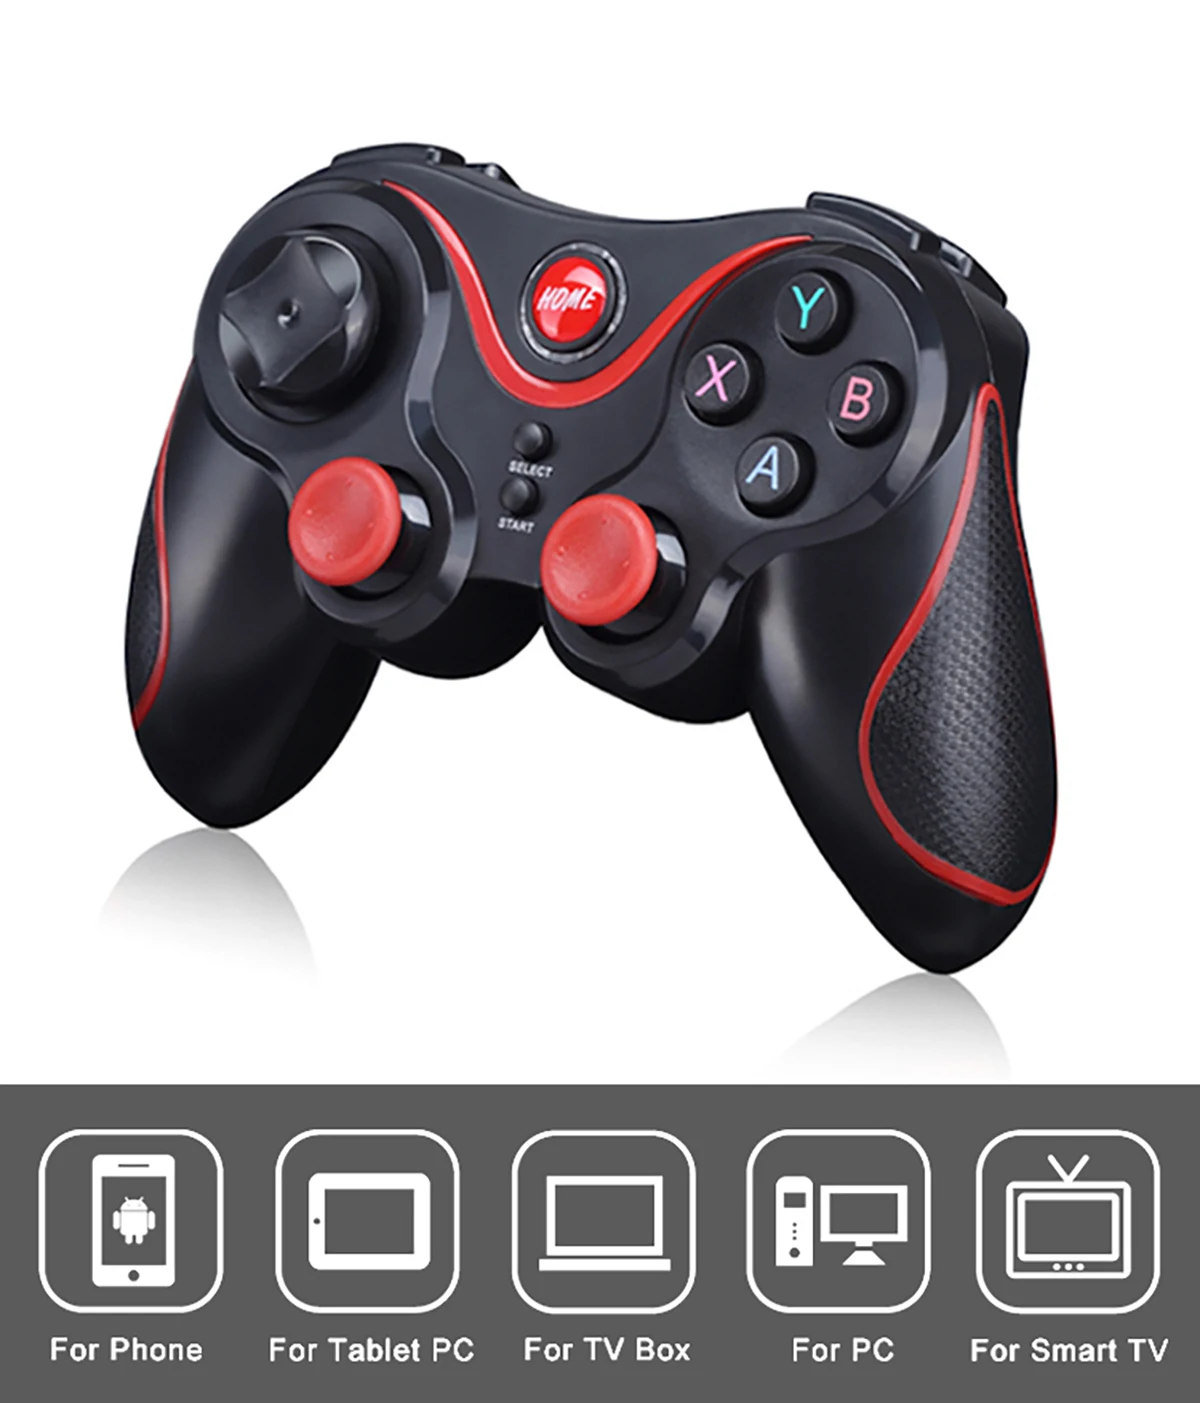 GAMINJA Wireless Bluetooth Gamepad PC Game Controller Gaming Joystick For Android Mobile Phone TV Box Playstation 3 Tablet PC 1